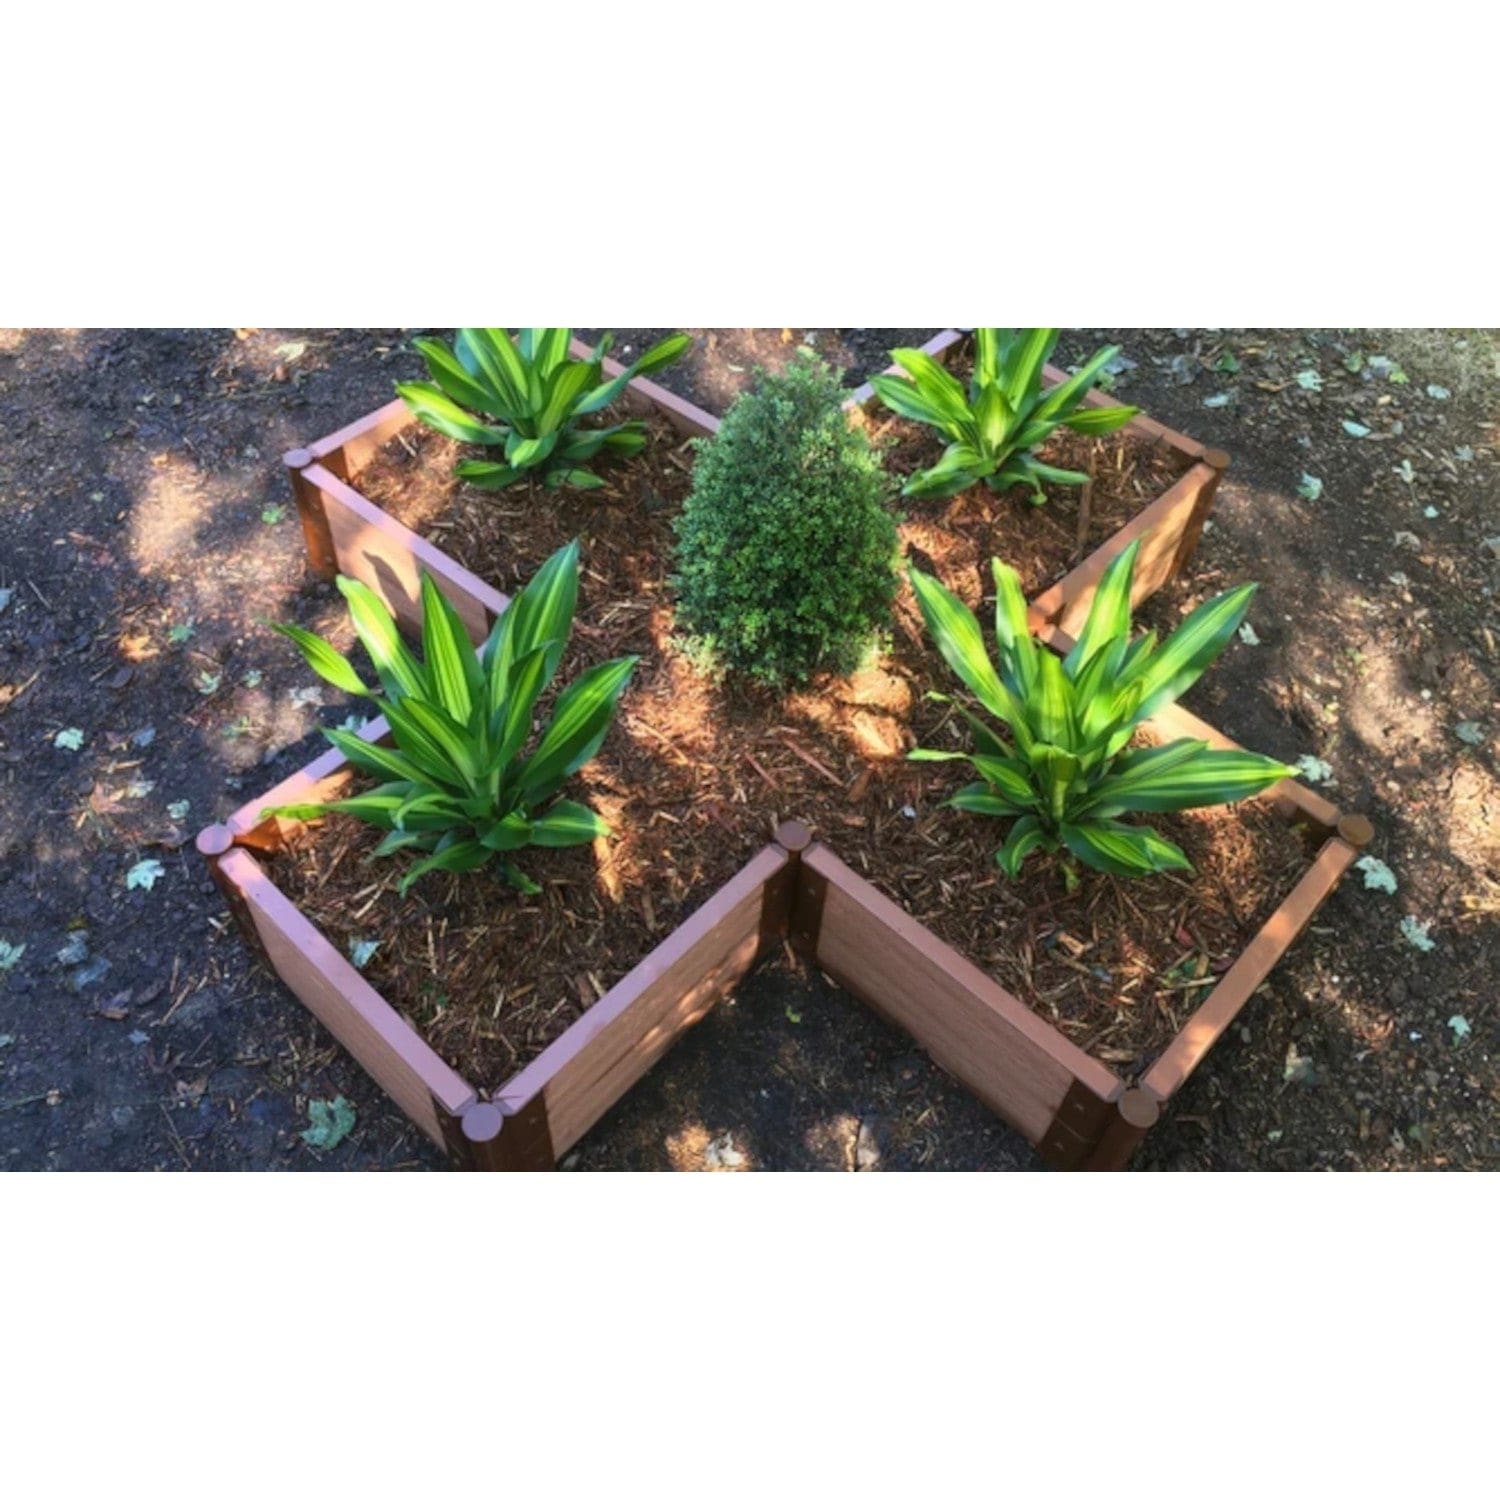 Frame It All Gardening Accessories Frame It All | Tool-Free Military Medallion Raised Garden Bed (Kit Cross) 6' X 6' X 11" - Uptown Brown - 1" Profile 200002486